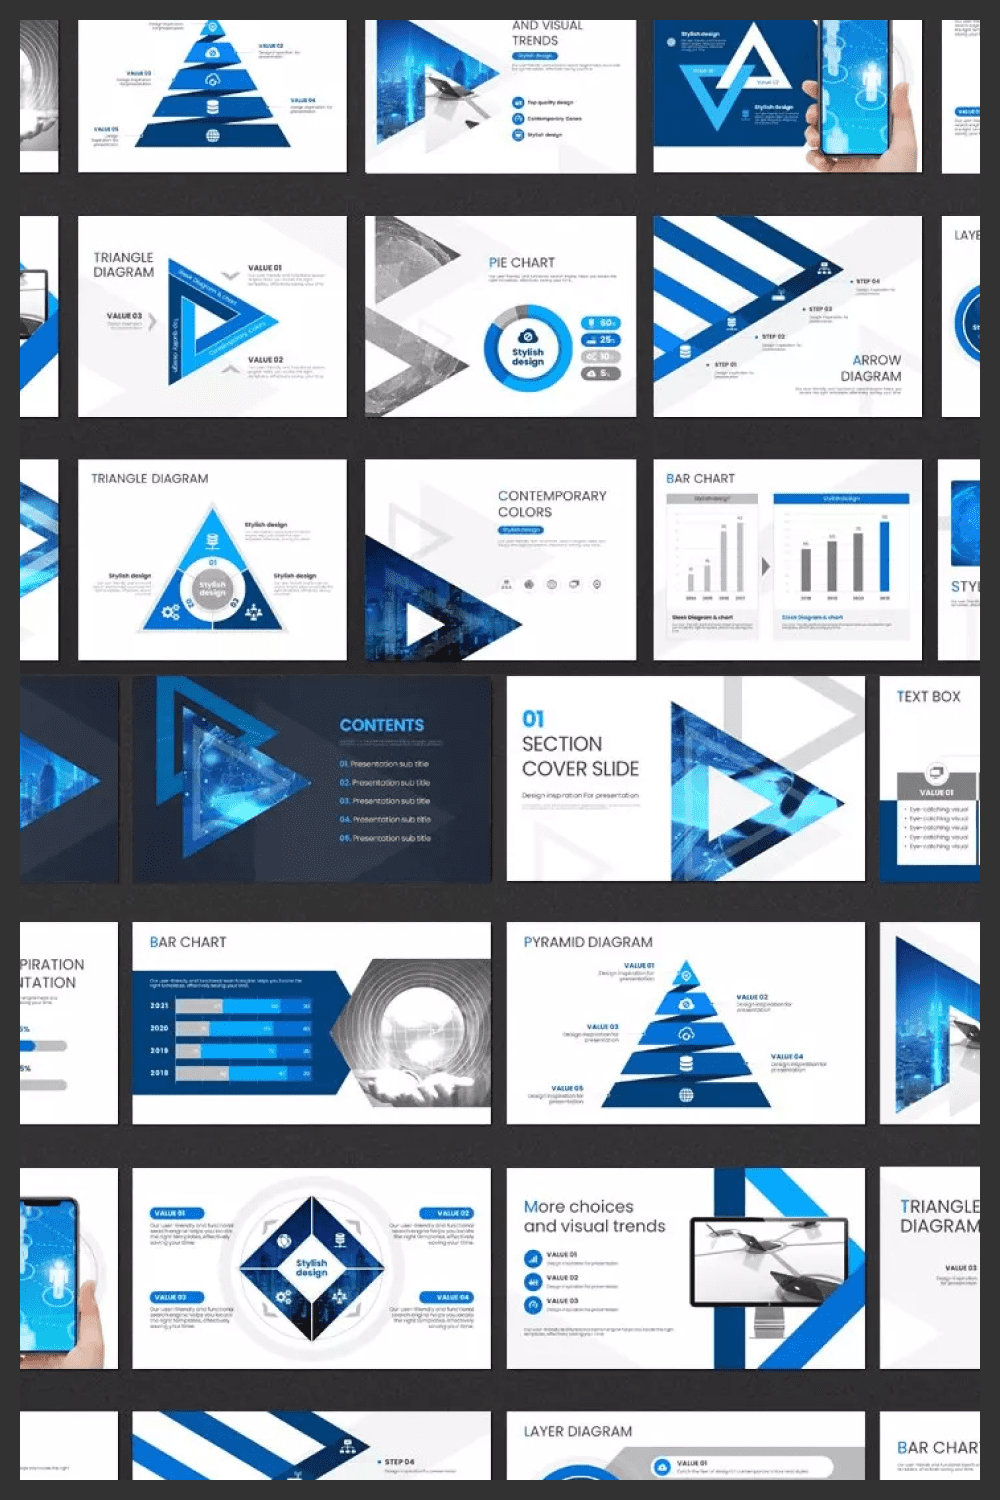 Slides collage with white background and blue geometric shapes.